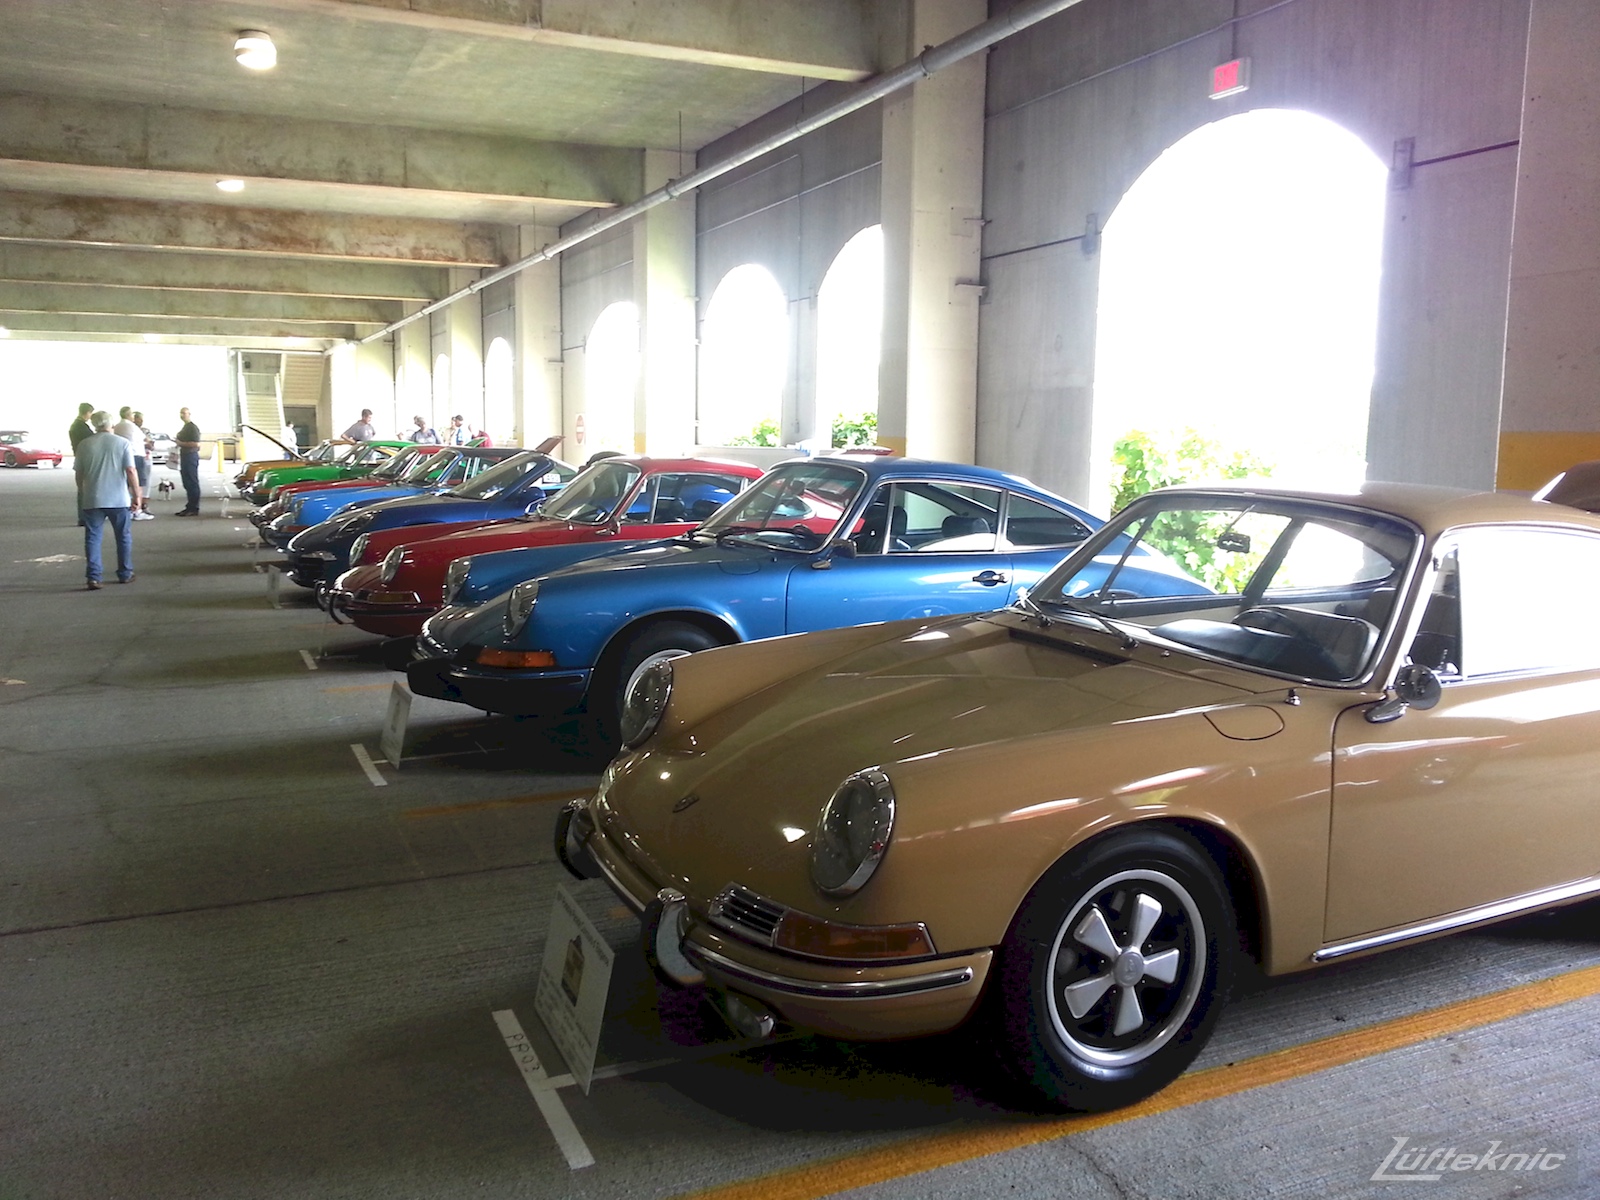 Clean 1970s 911s.